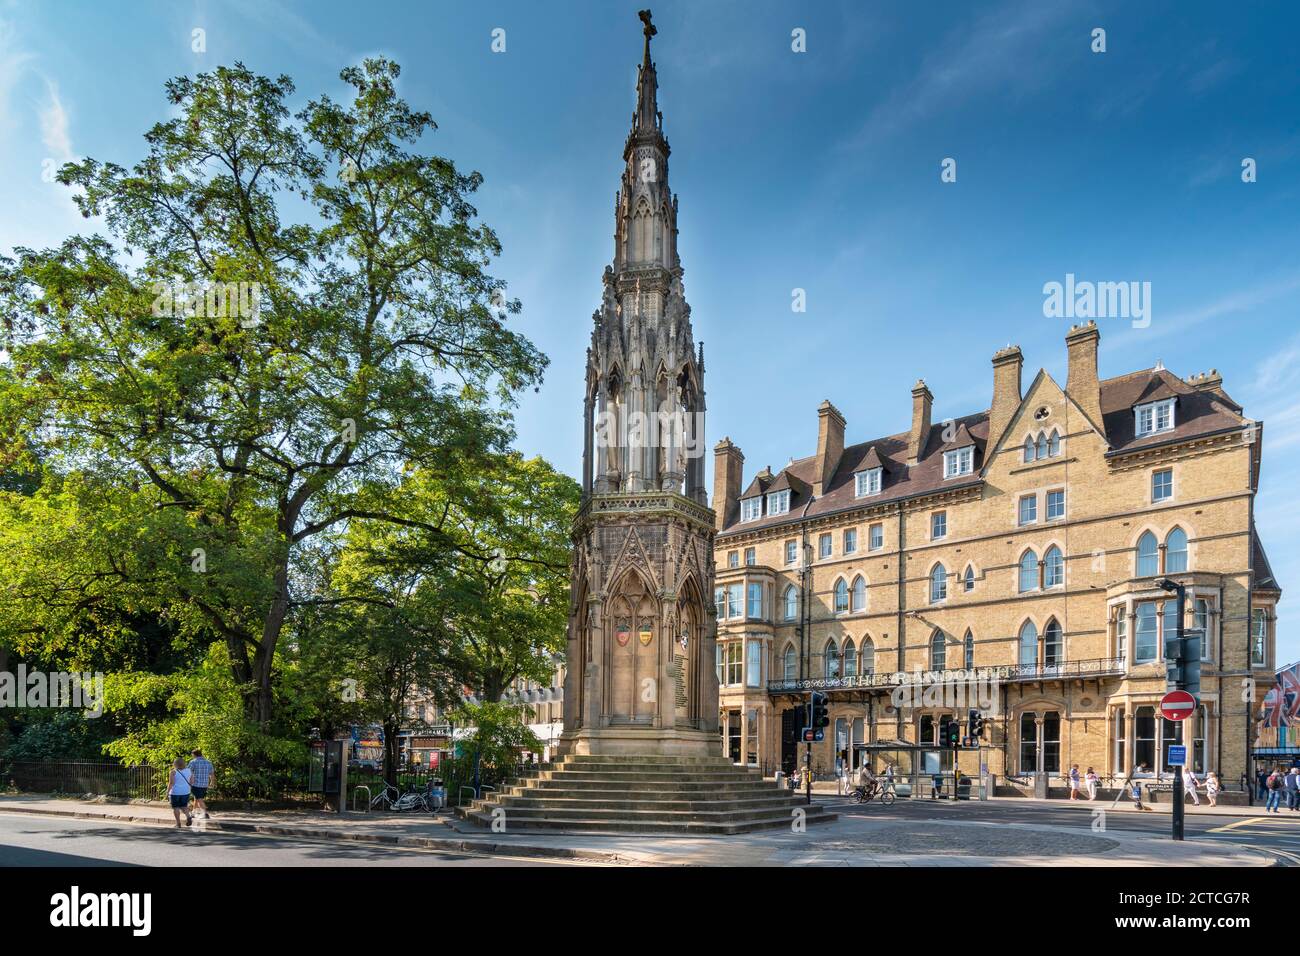 OXFORD CITY ENGLAND THE MARTYRS MEMORIAL AND RANDOLPH HOTEL ON MAGDALEN STREET Stock Photo